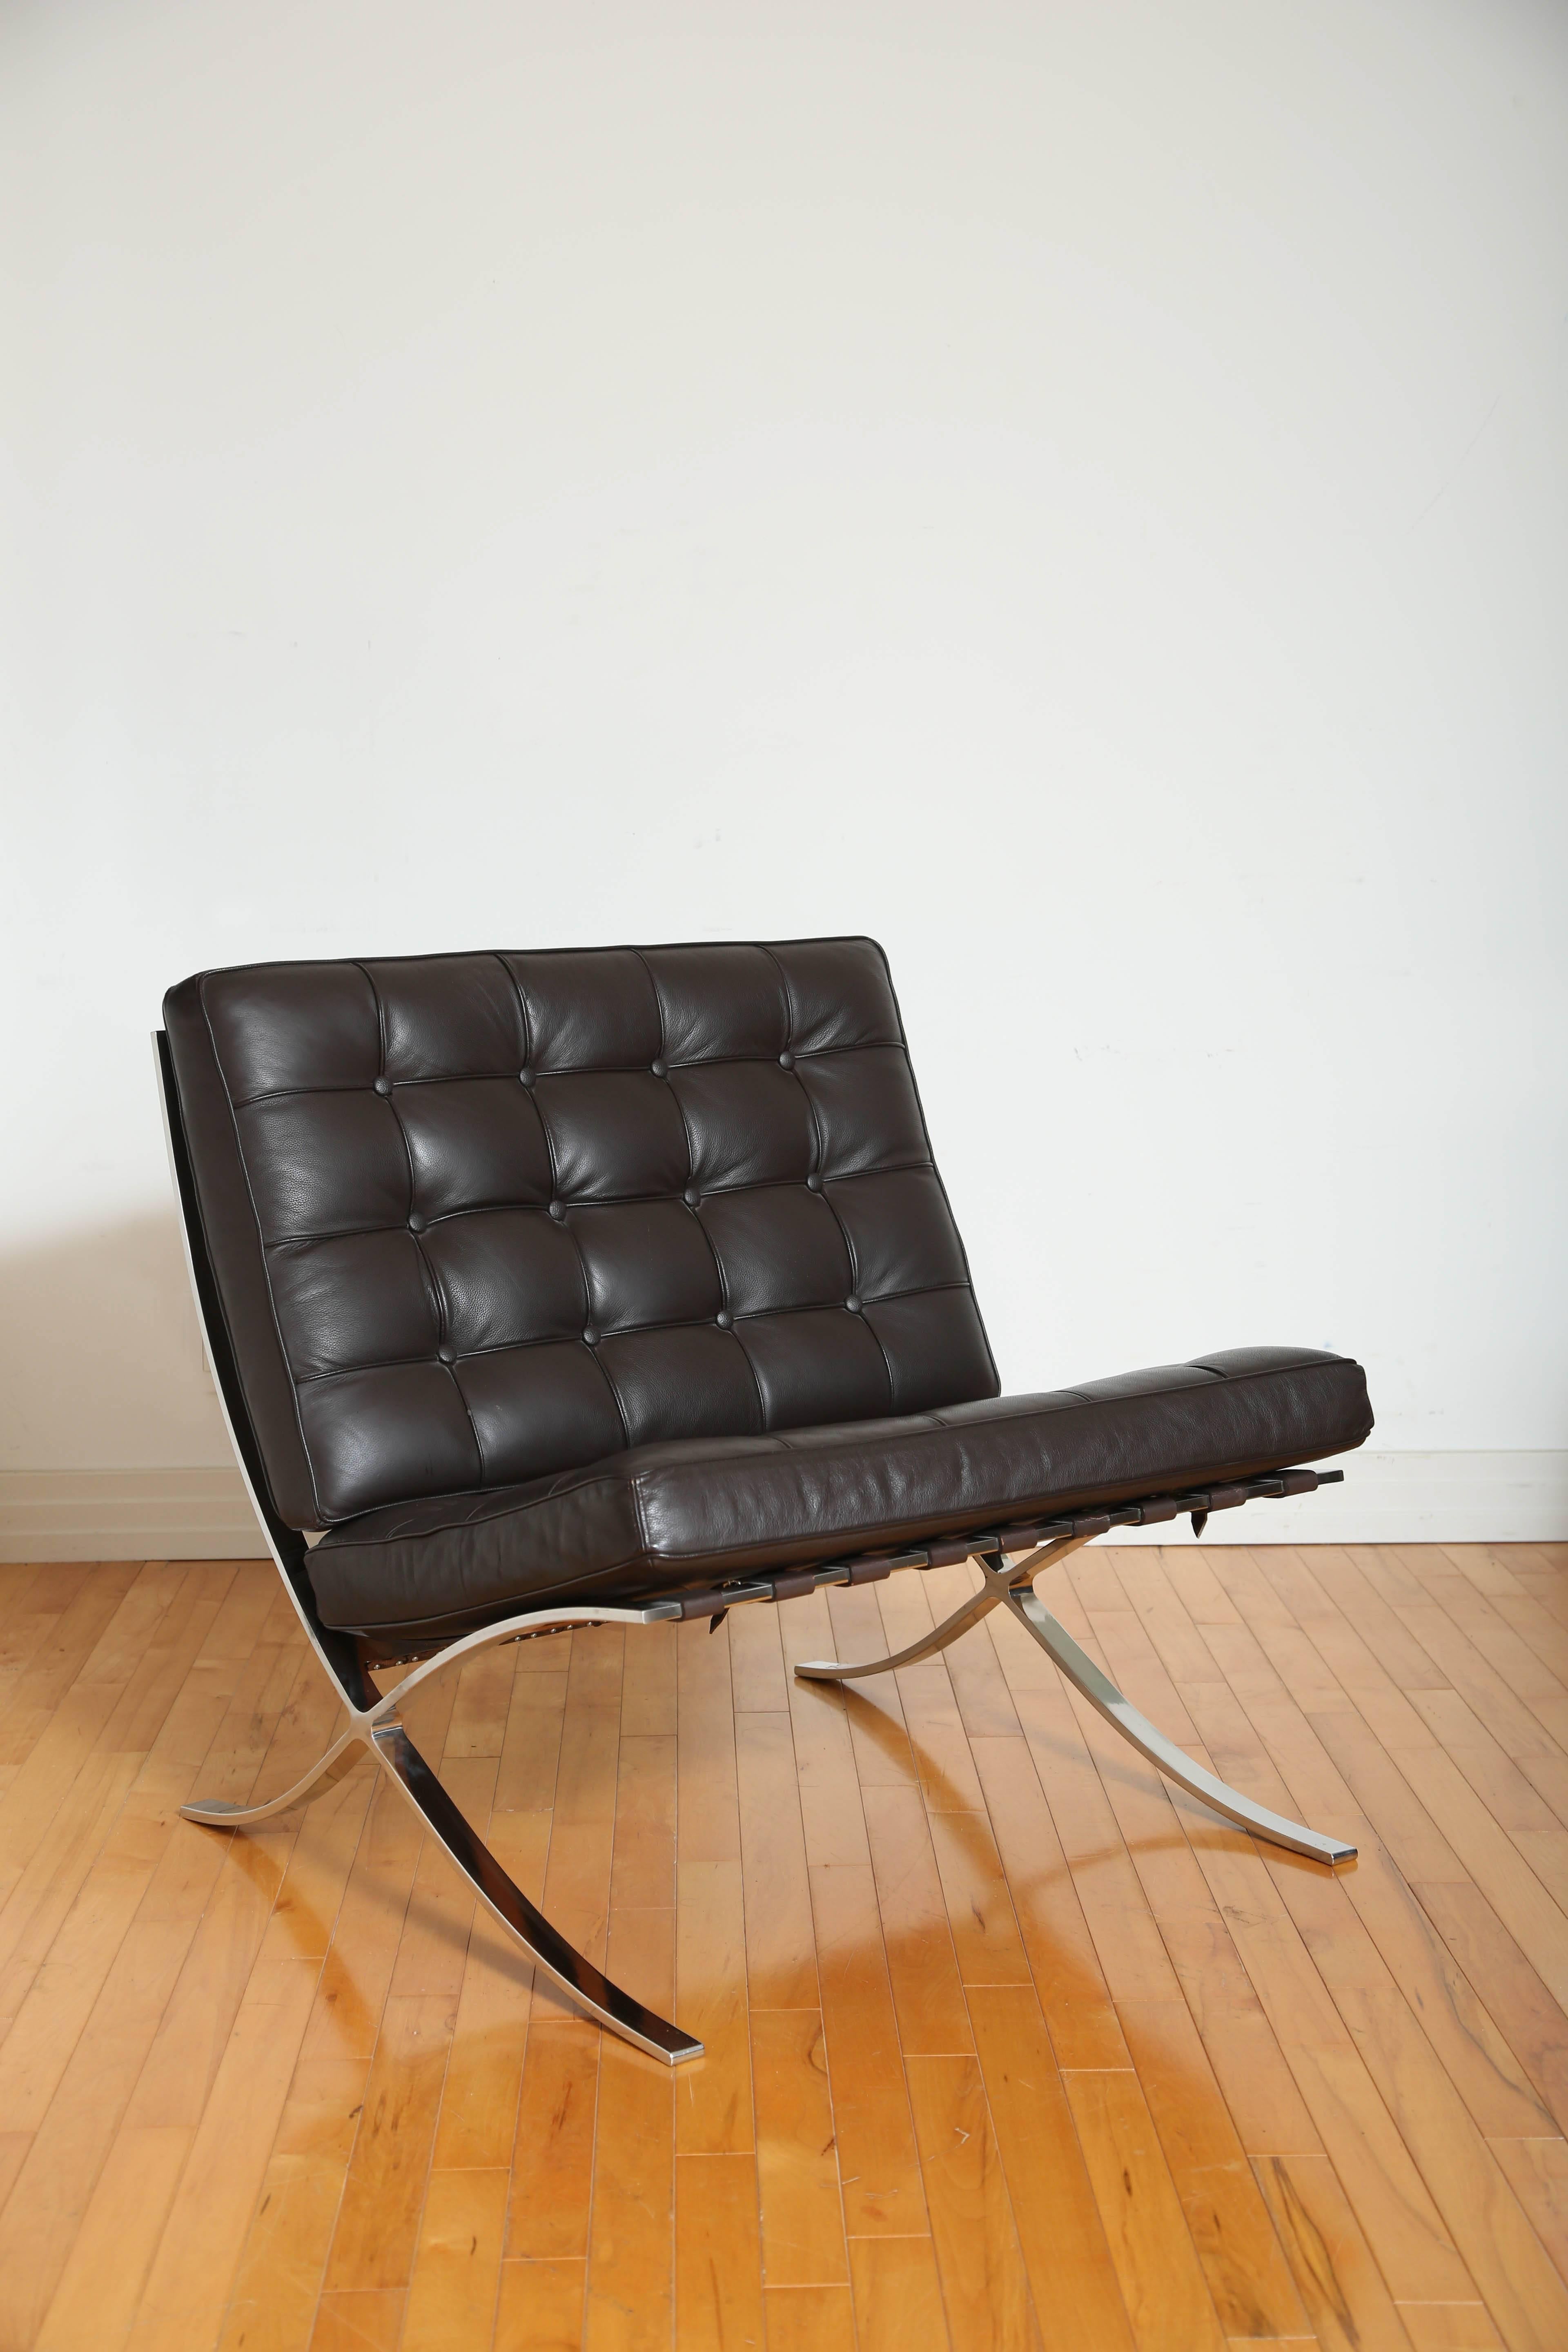 Vintage Barcelona lounge chair in espresso brown leather.  Iconic design originally manufactured during the Bauhaus Movement, circa 1929.  The chair has a slight recline, and features leather slats along the back with tufted seat cushions. Suited